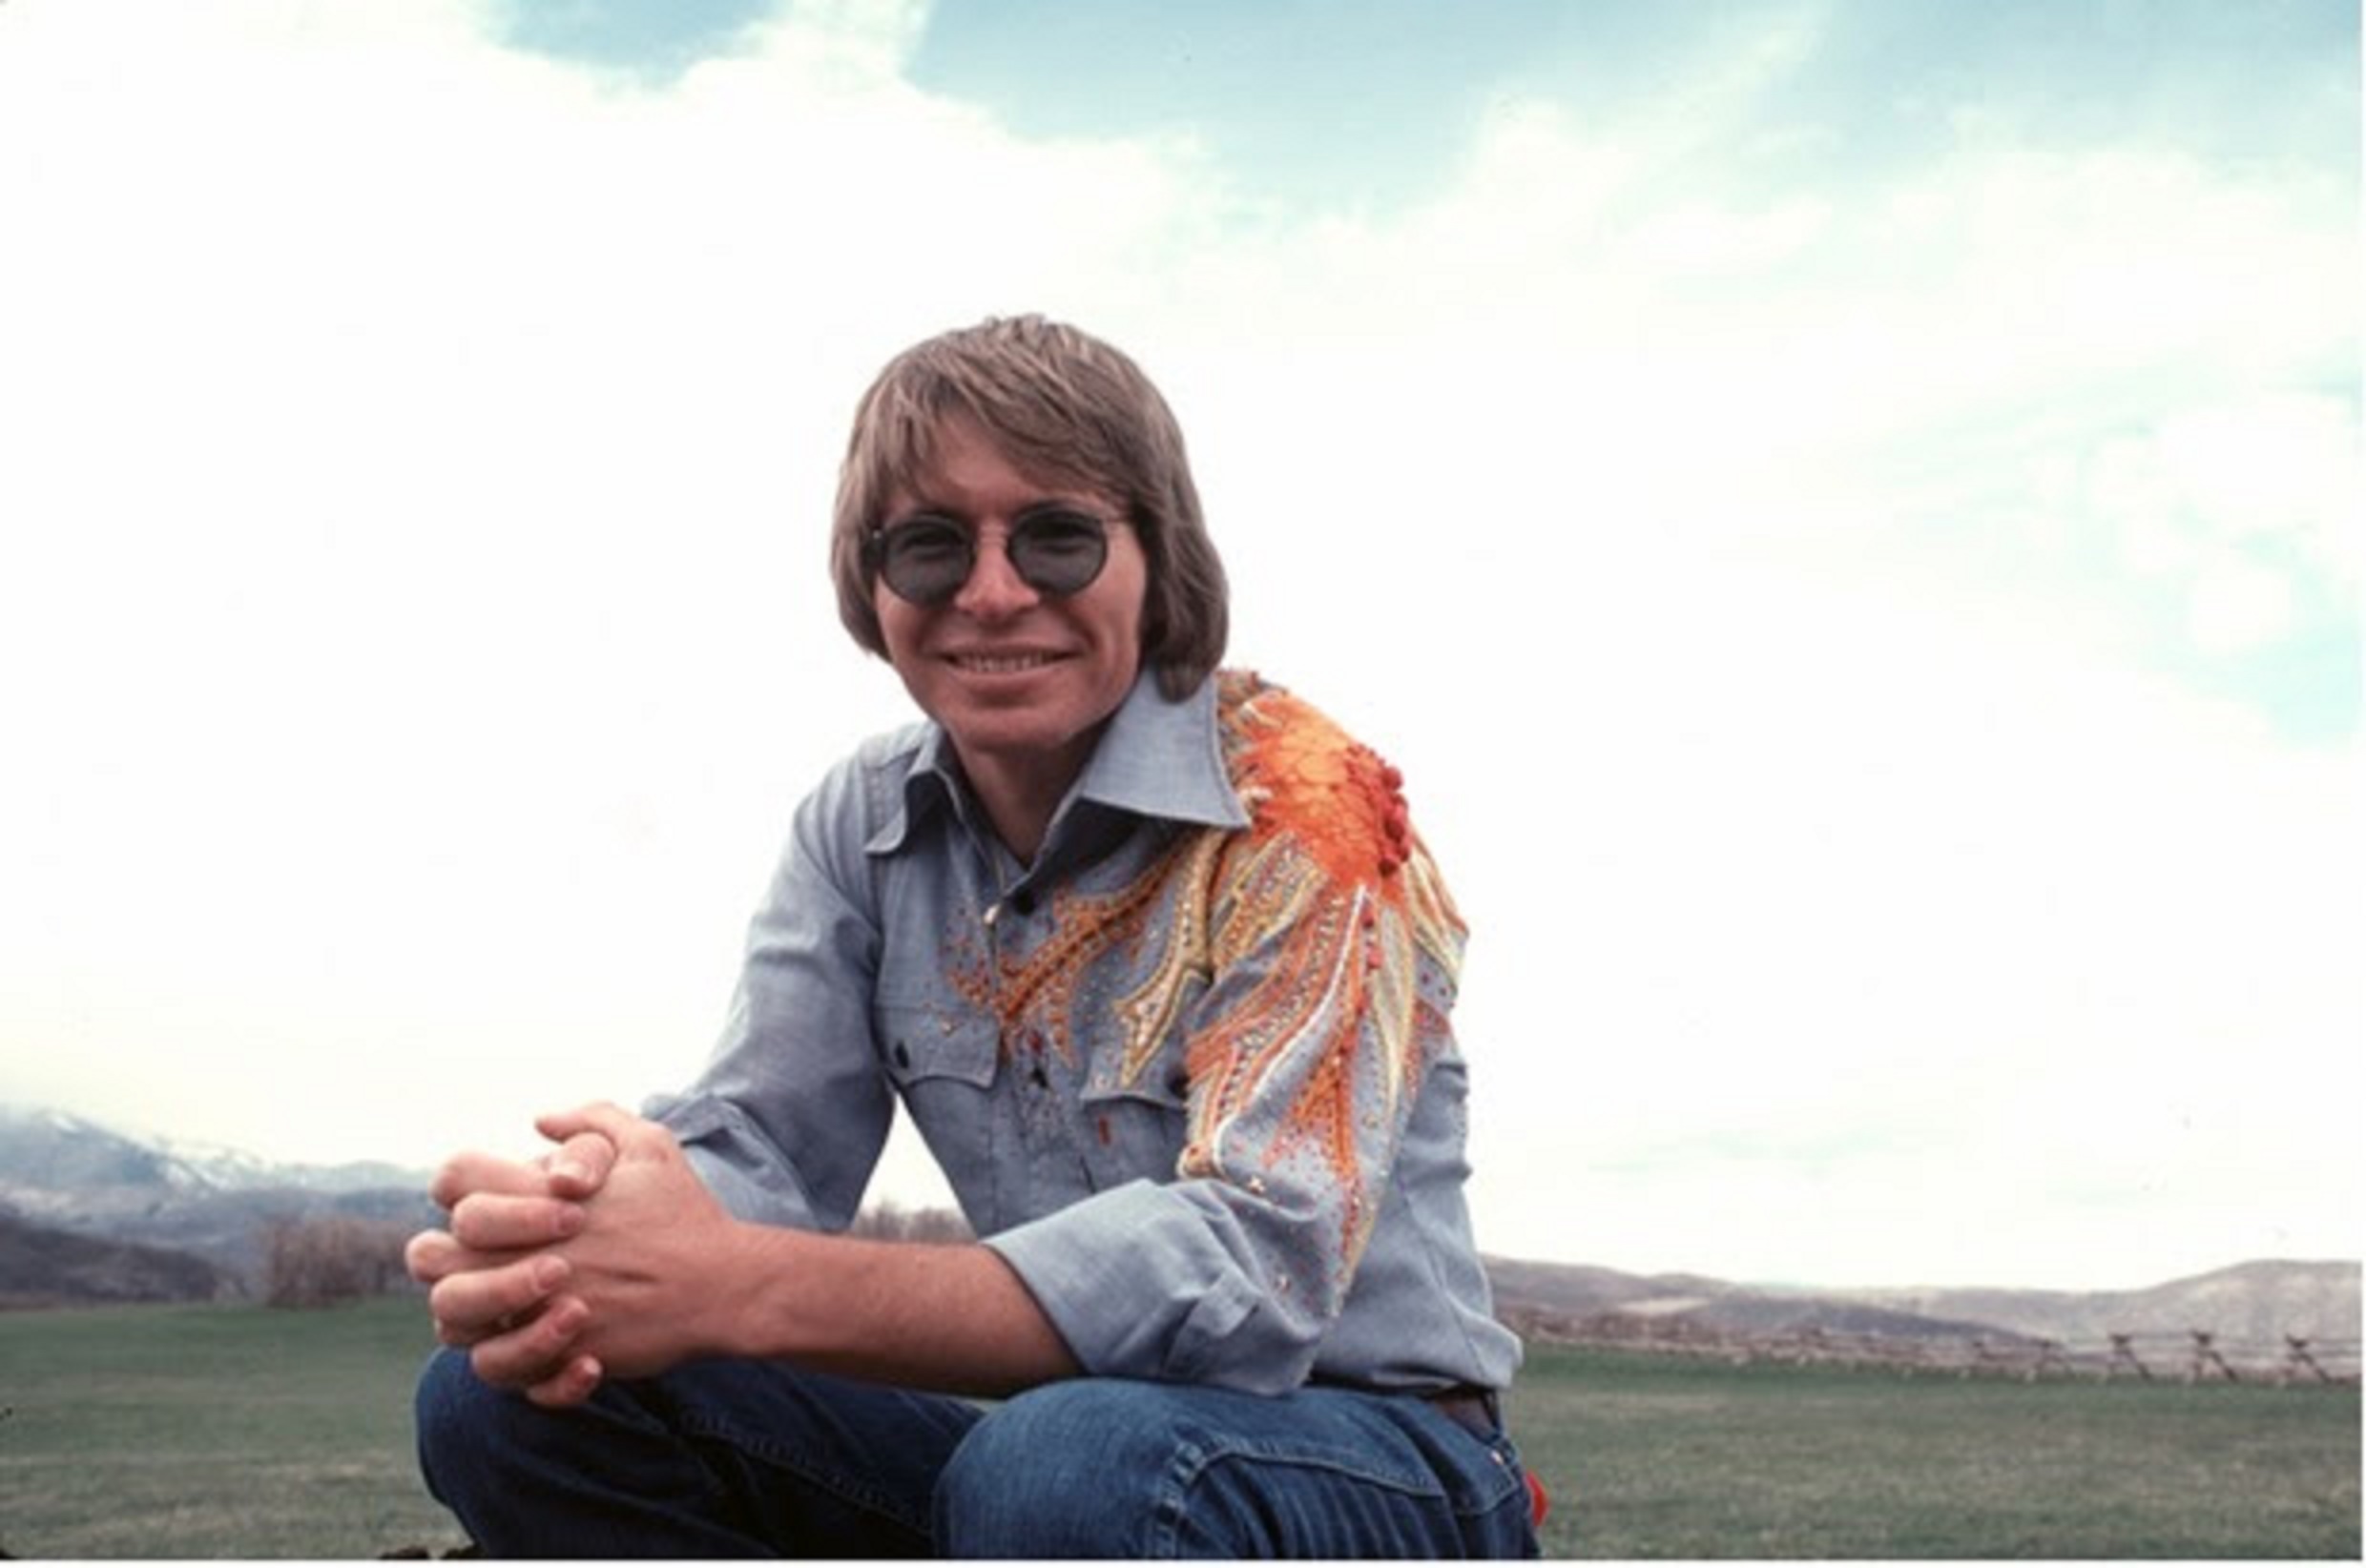 John Denver's 'Rocky Mountain High' 50th Anniversary reissue out today, limited edition blue vinyl available now